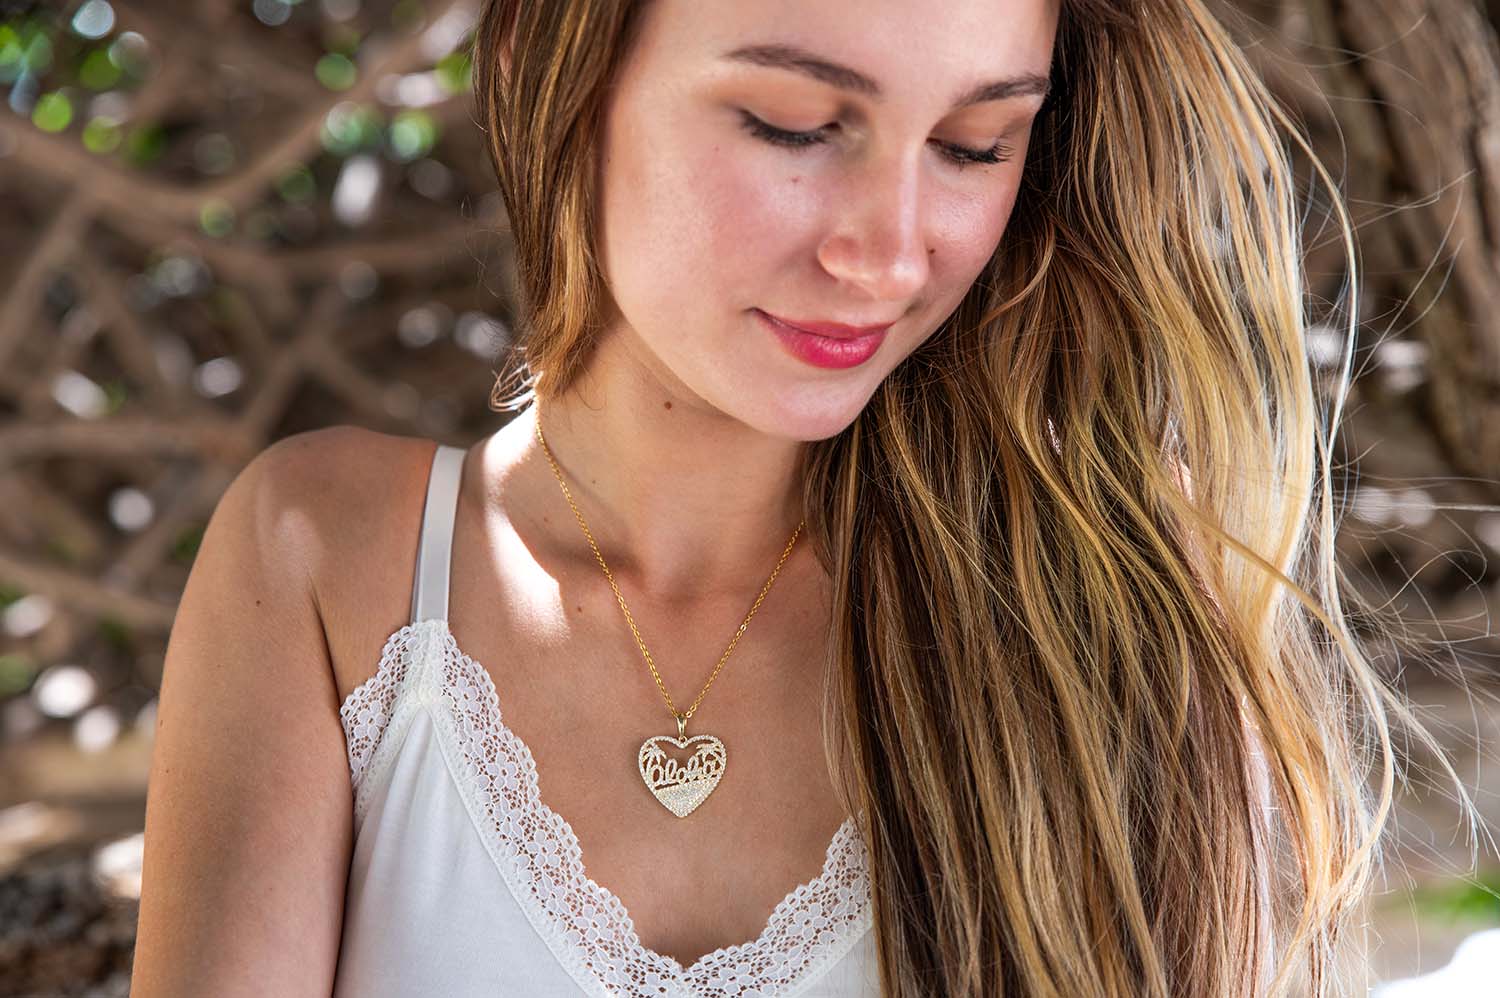 14K Gold vermeil heart pendant paved with white topaz gemstones and with aloha design inside the heart